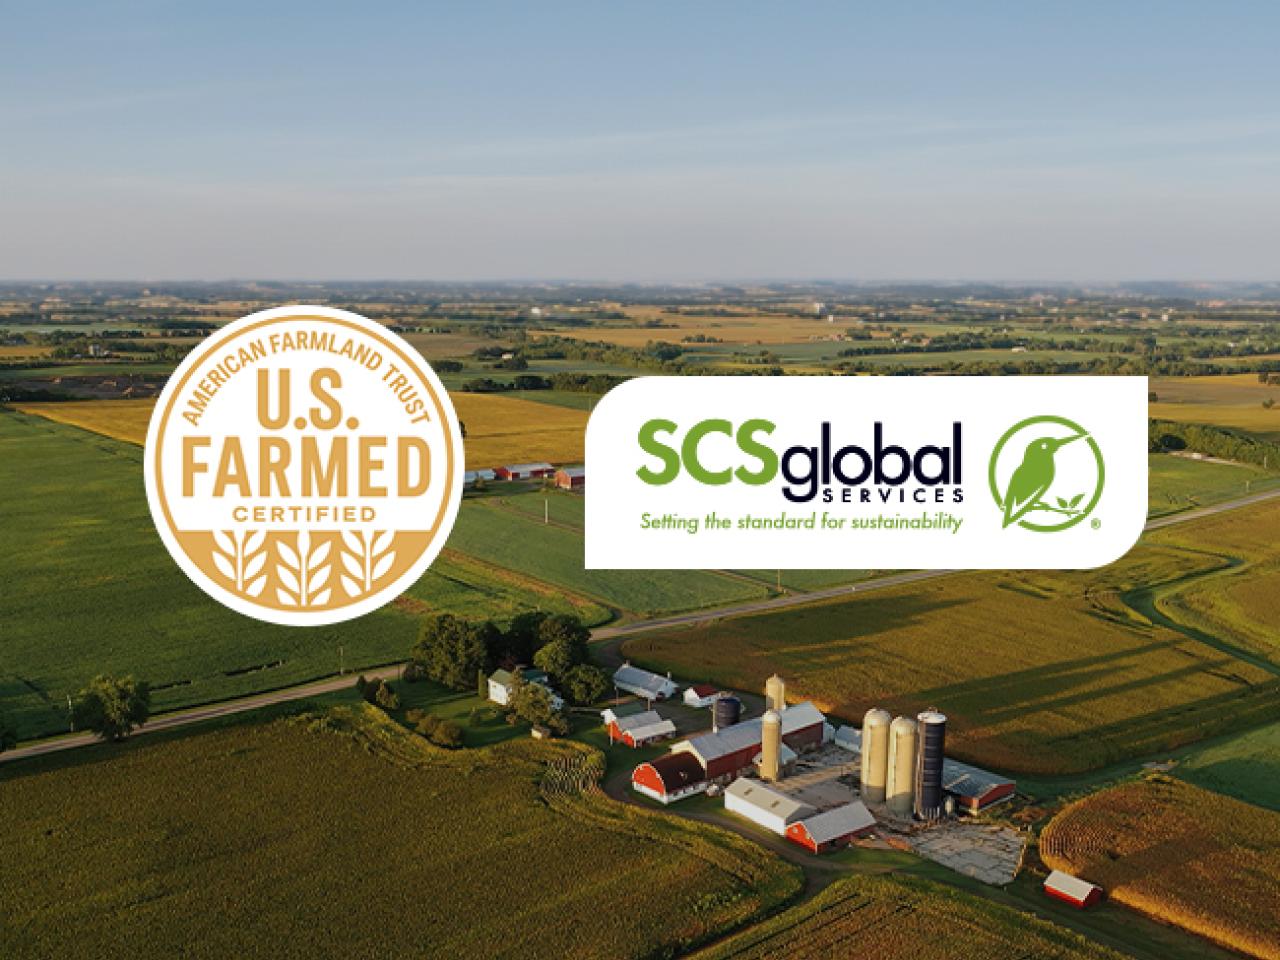 SCS Approved To Offer U.S. Farmed Certification